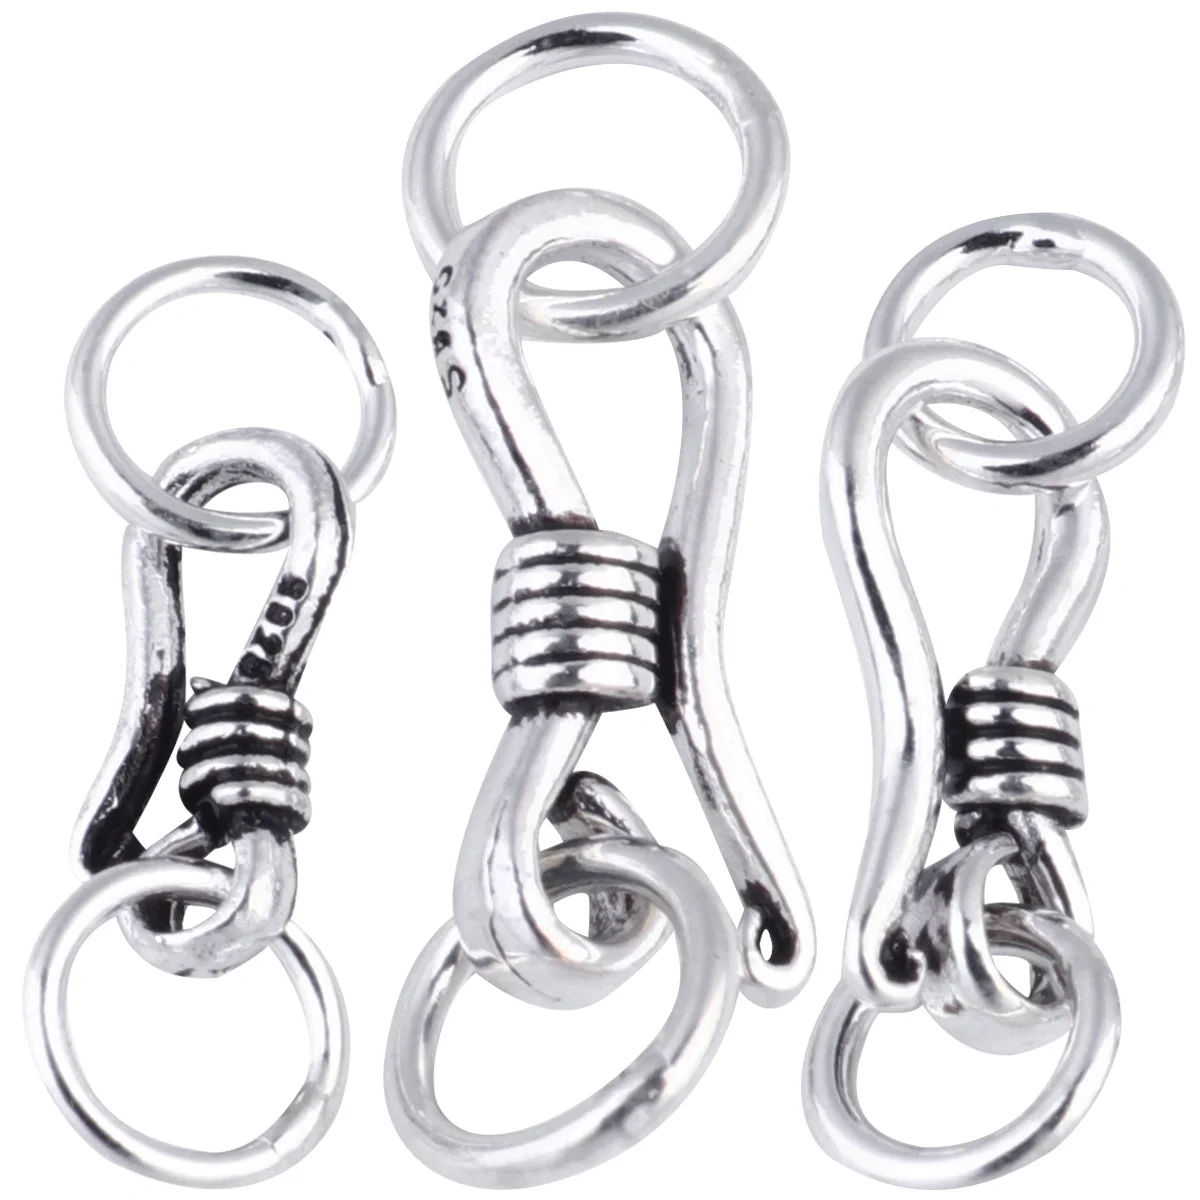 

3PCS Hook Ring Toggle Clasps Tibetan Style End Clasp Connector For Bracelet Necklace Jewelry Making ( Silver )